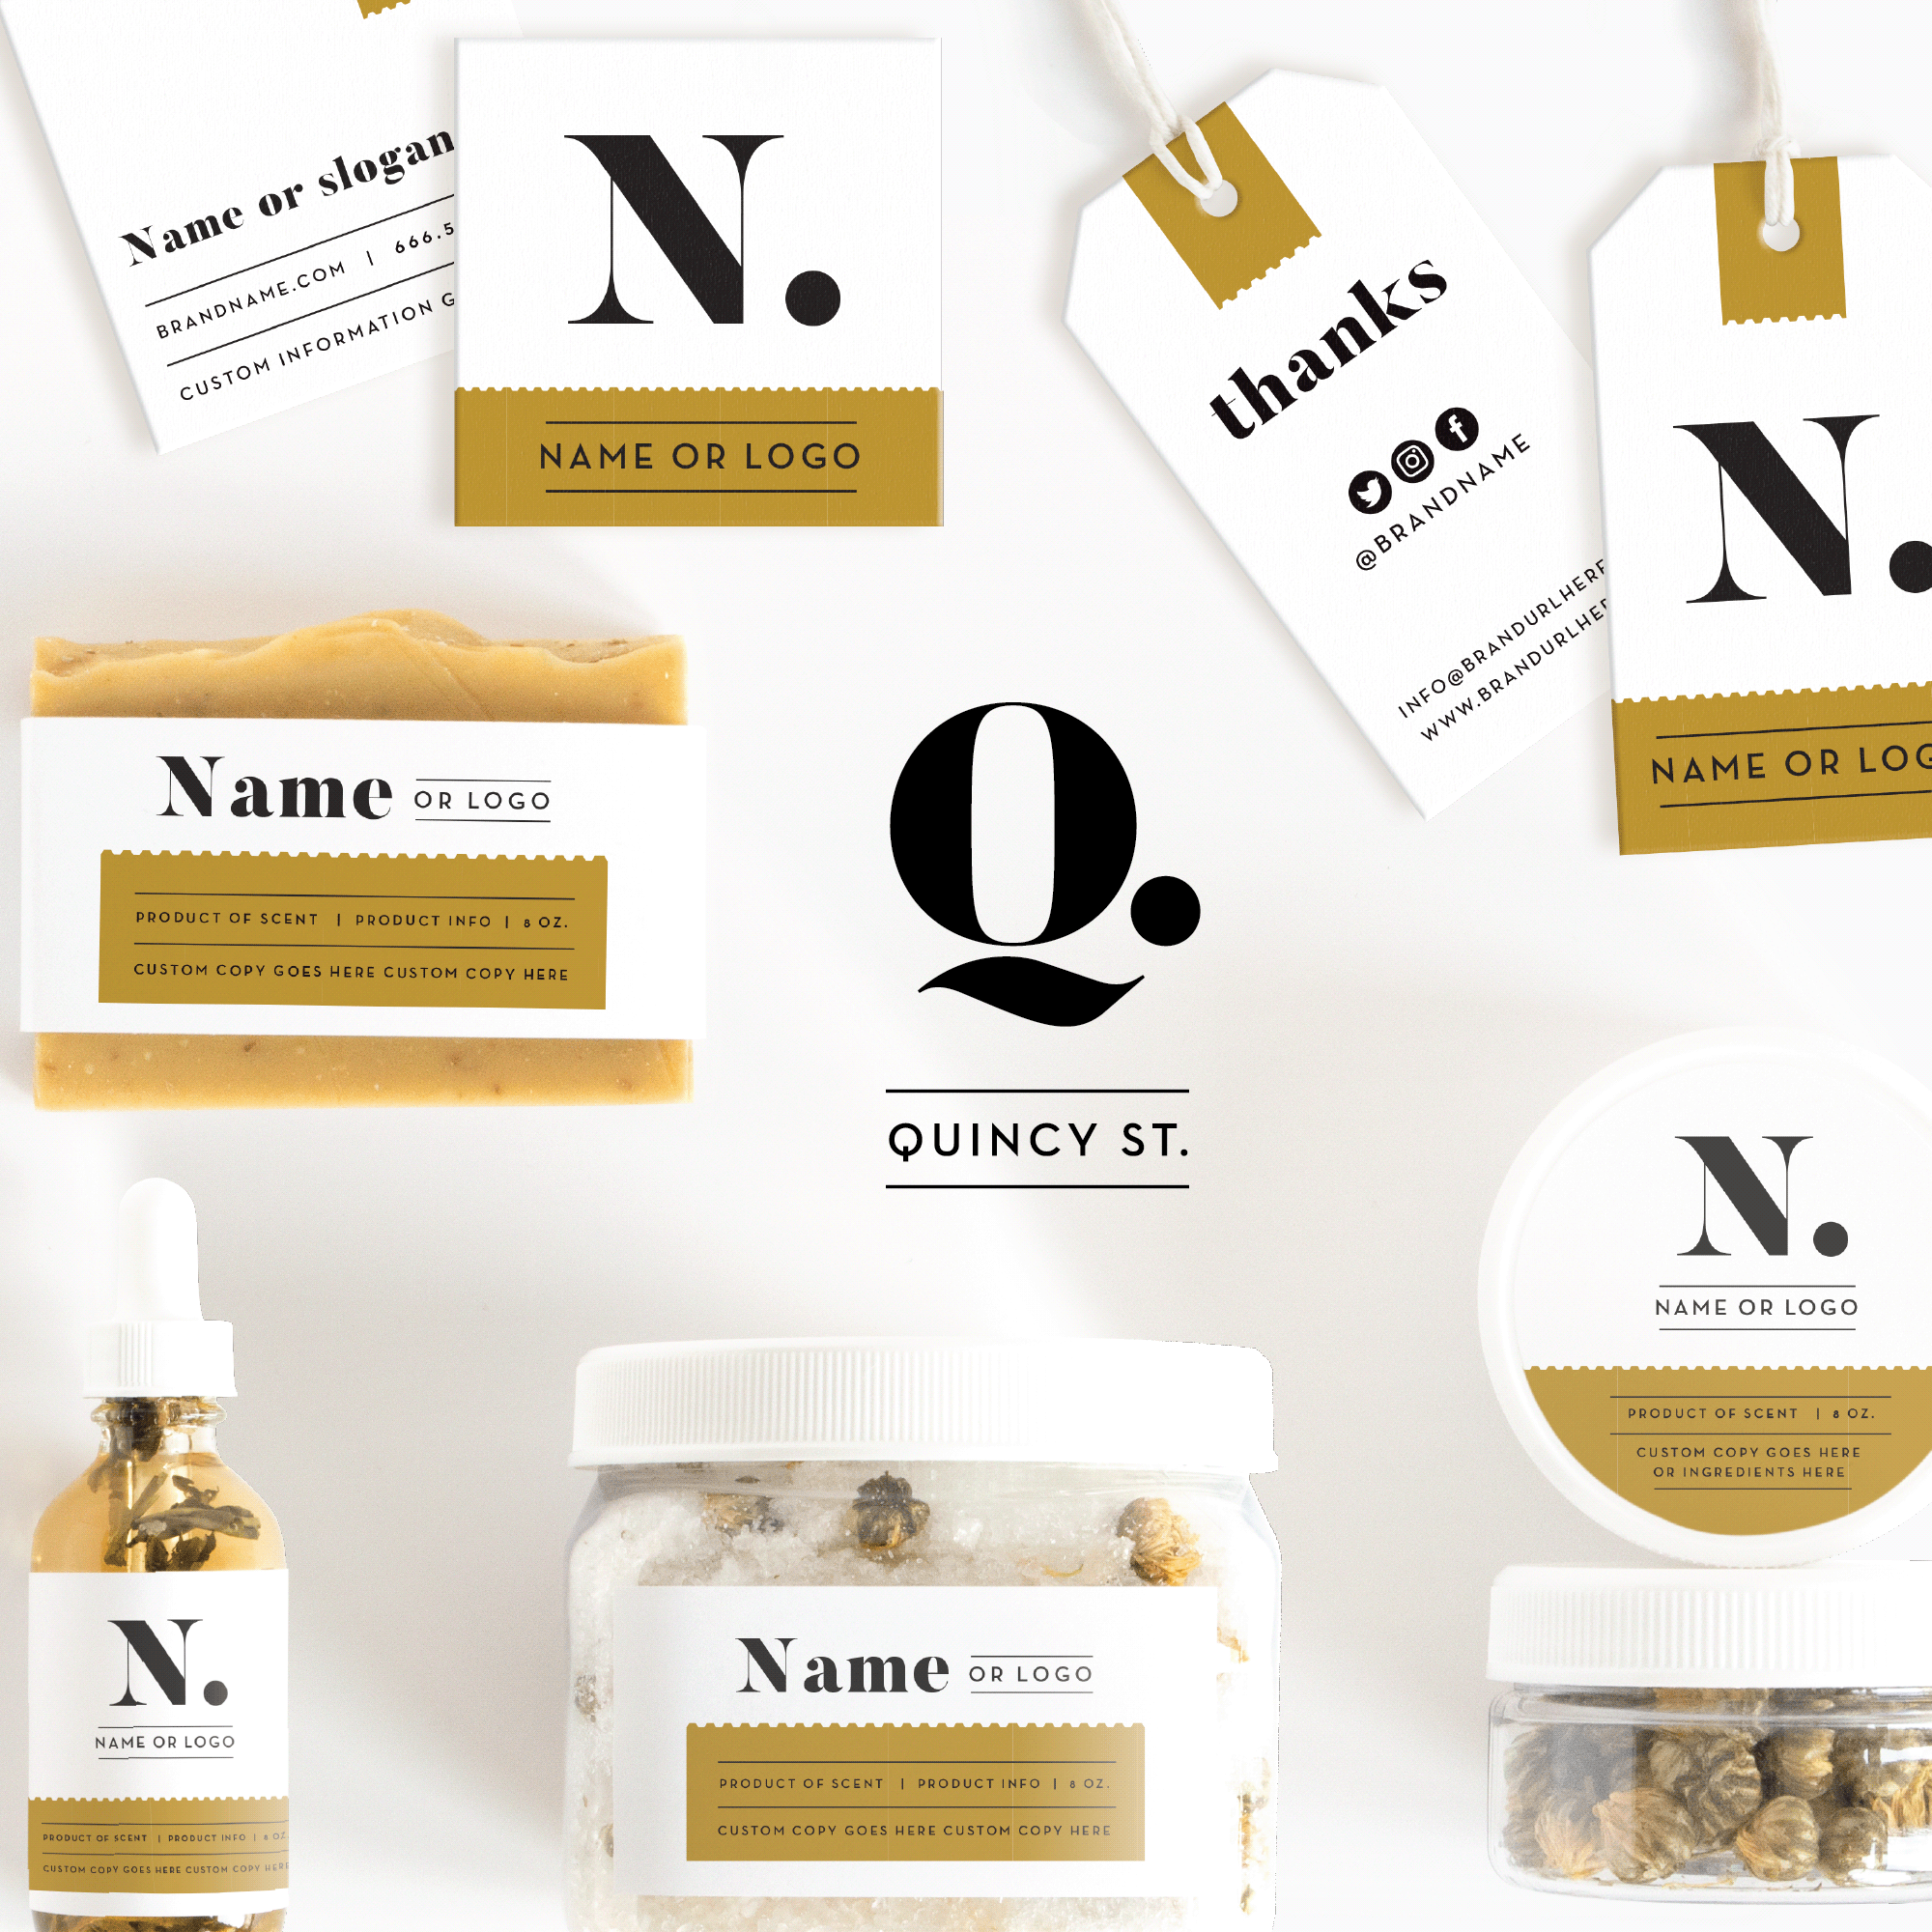 Quincy Street Wrap Product Label